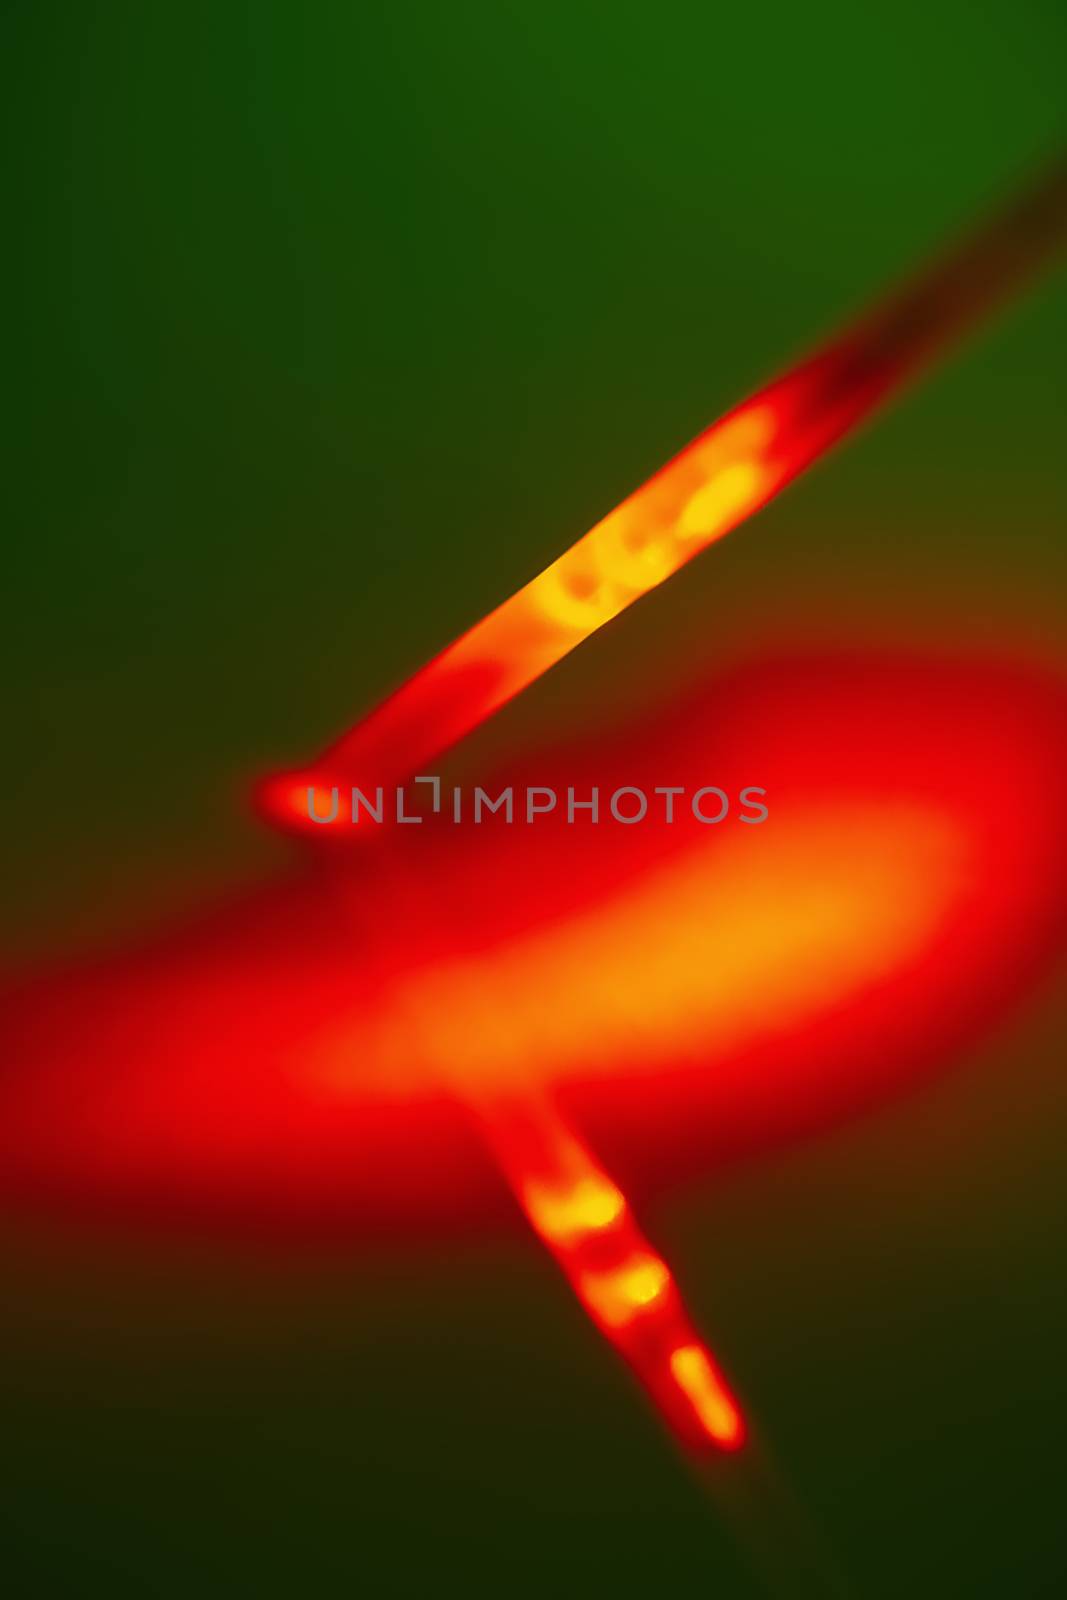 Red bright light source on the end of the probe in a plastic tube by fotooxotnik